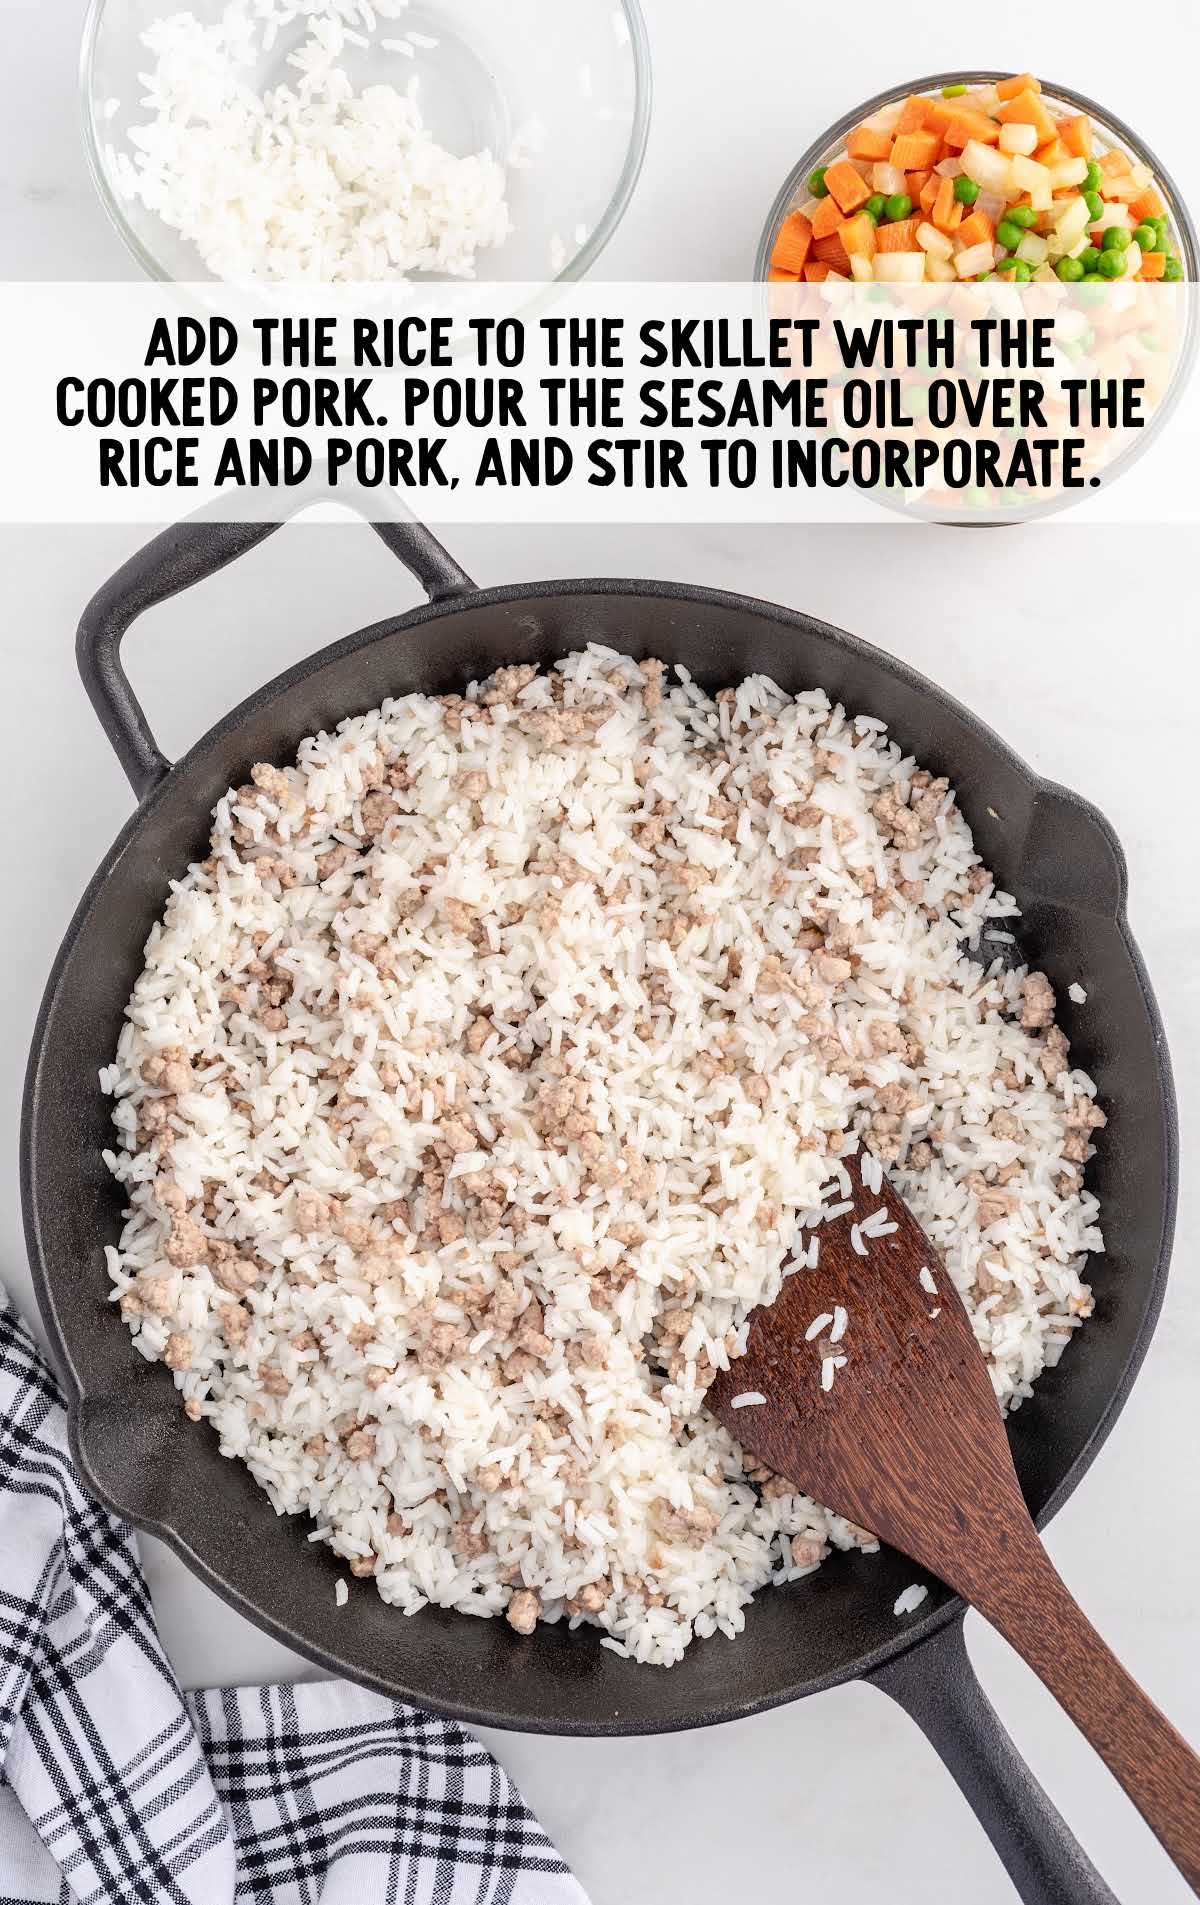 rice added to pork on a skillet and sesame oil poured over the rice and pork